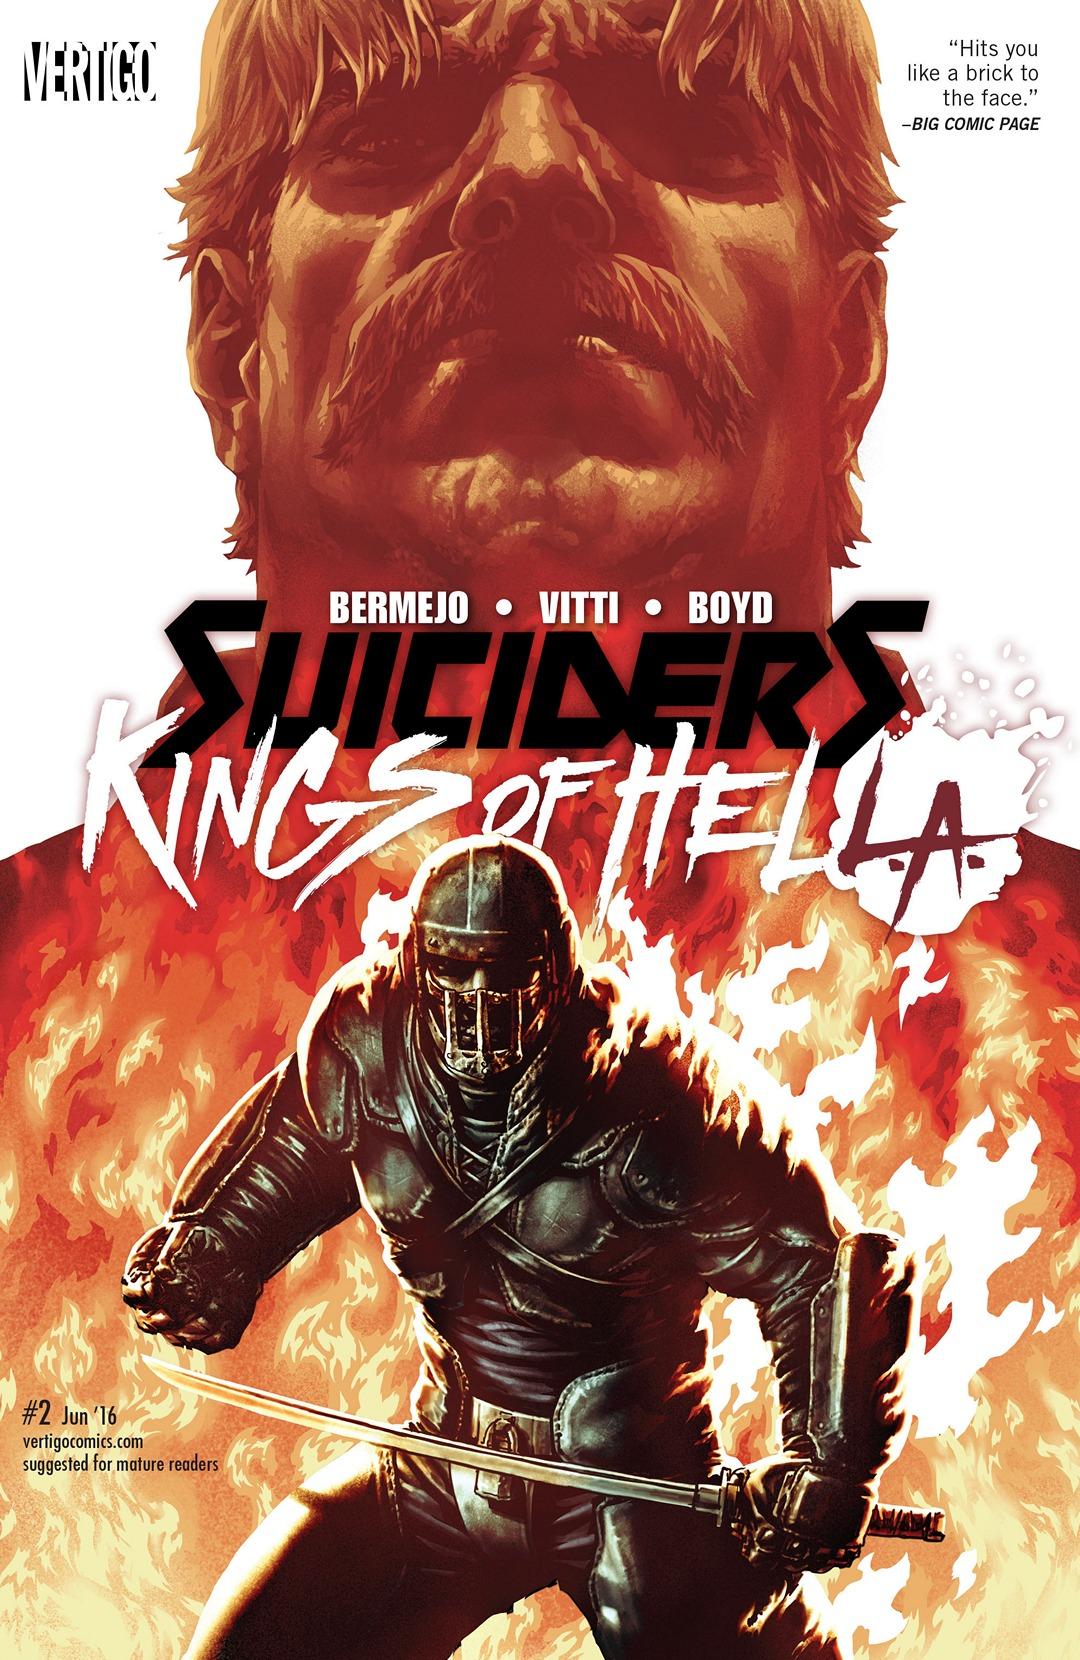 Suiciders: Kings of HELL.A. Vol. 1 #2